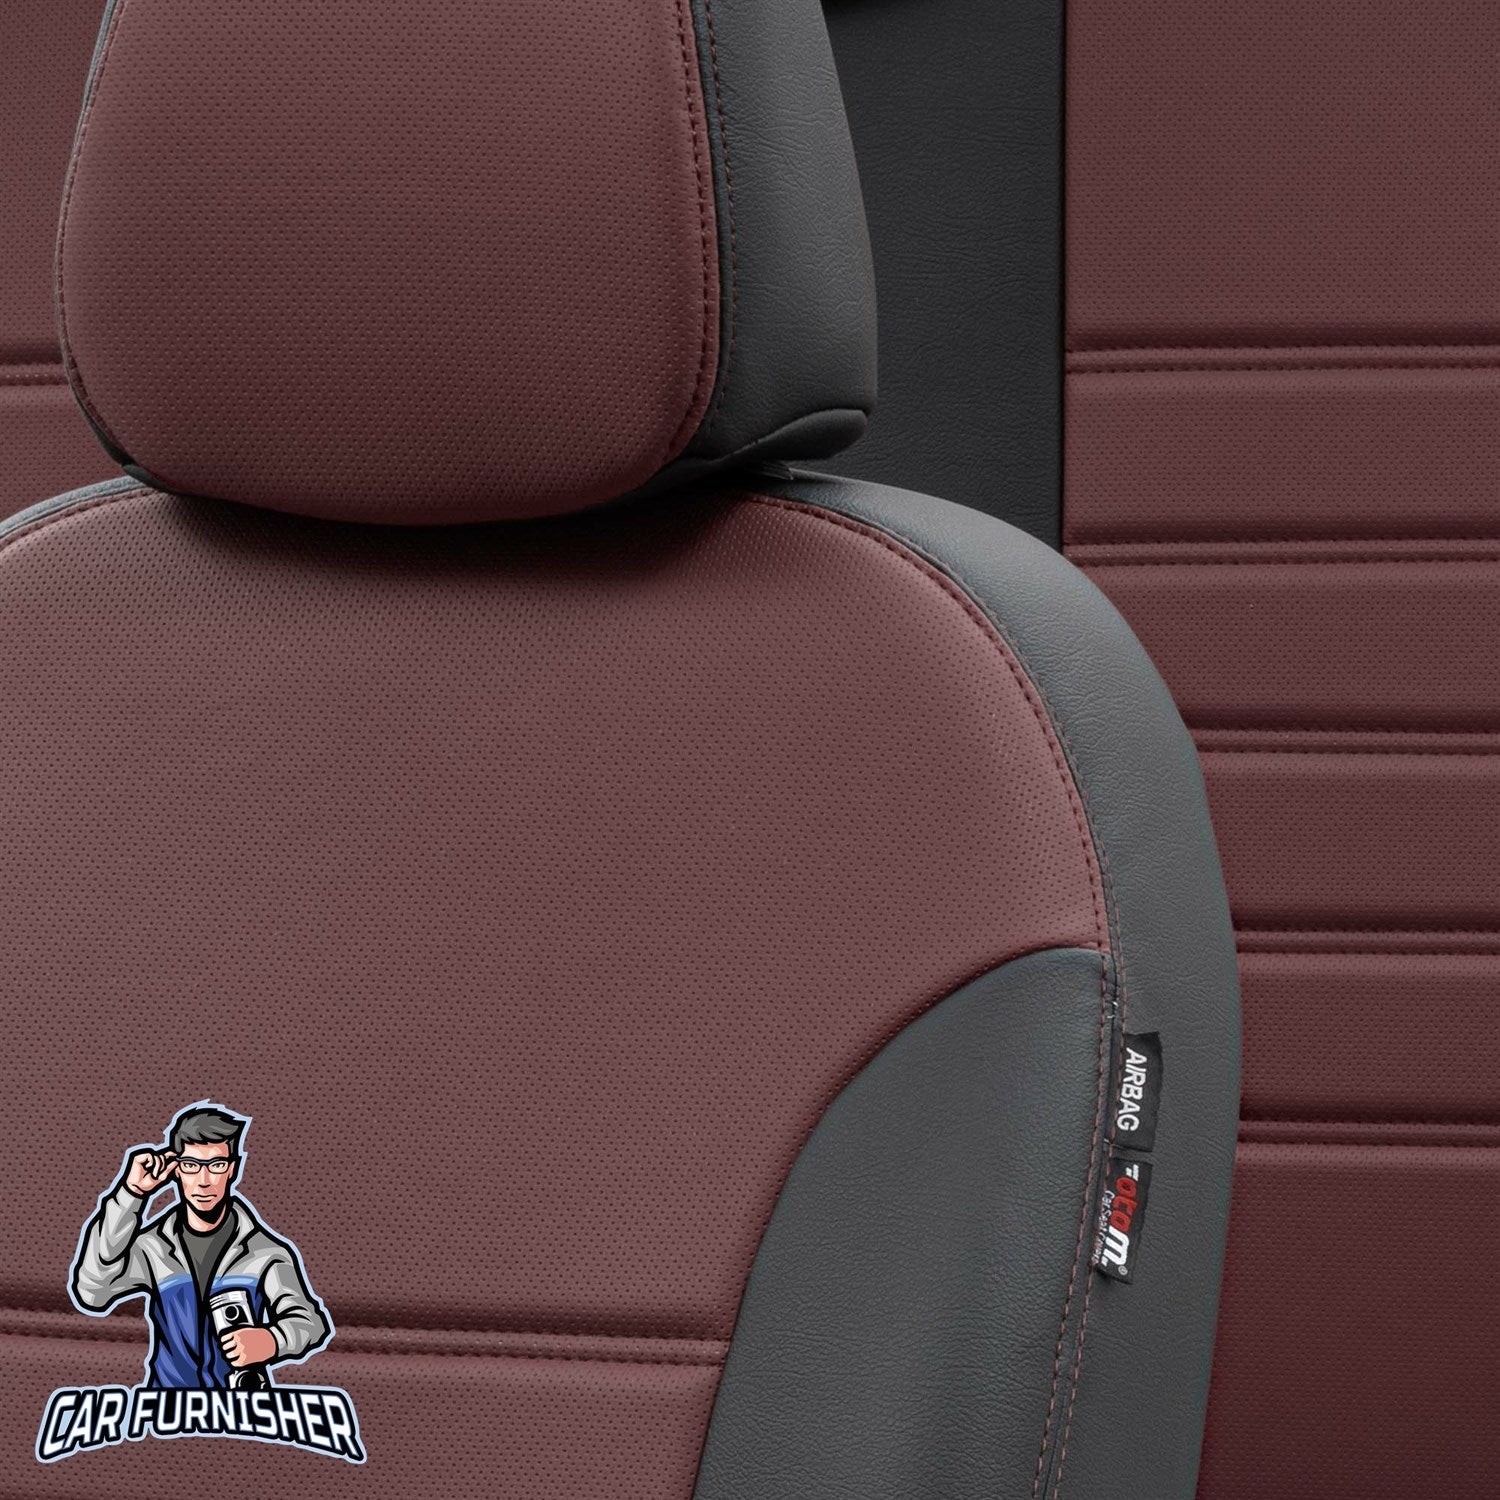 Mercedes E Class Seat Covers Istanbul Leather Design Burgundy Leather